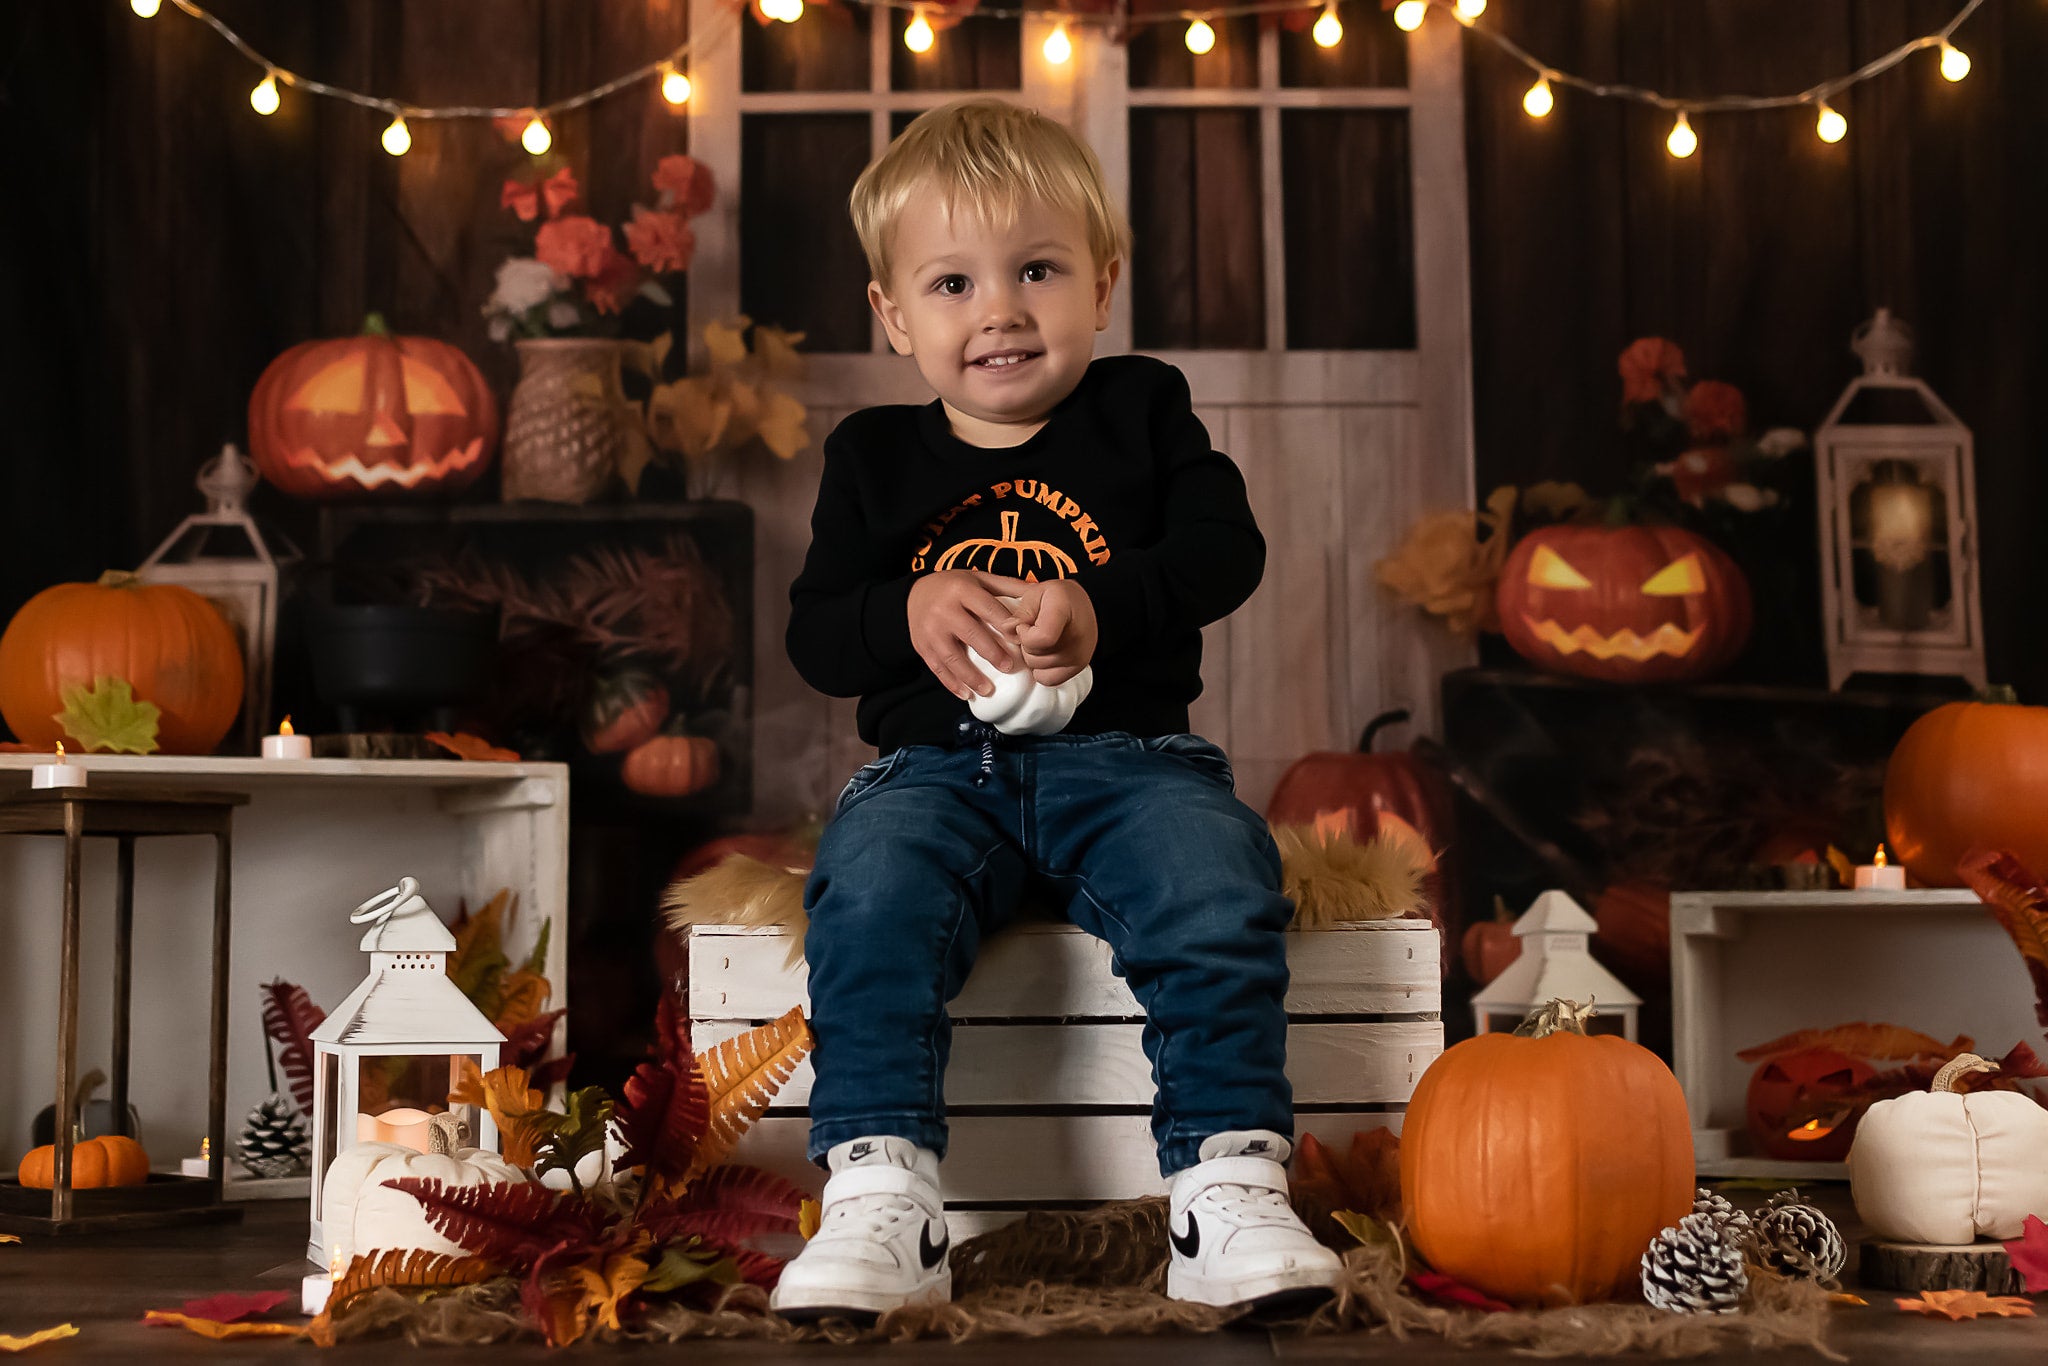 Kate Autumn/Thanksgiving Pumpkins Lights Backdrop Designed by Jia Chan Photography